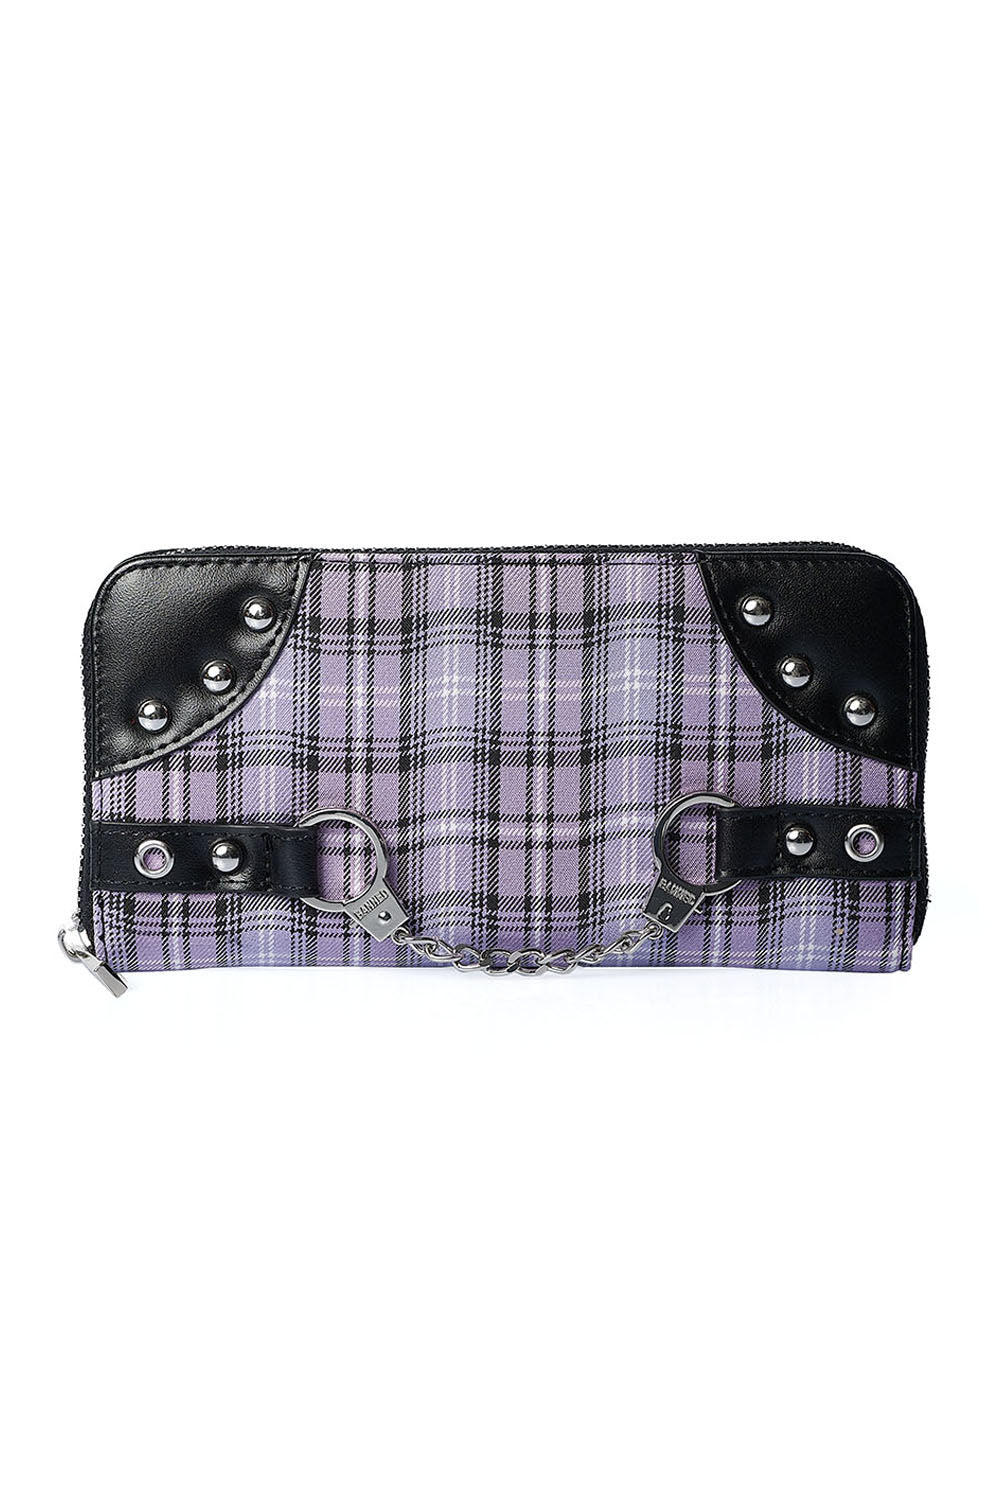 Banned Apparel Handcuff wallet | Lilac